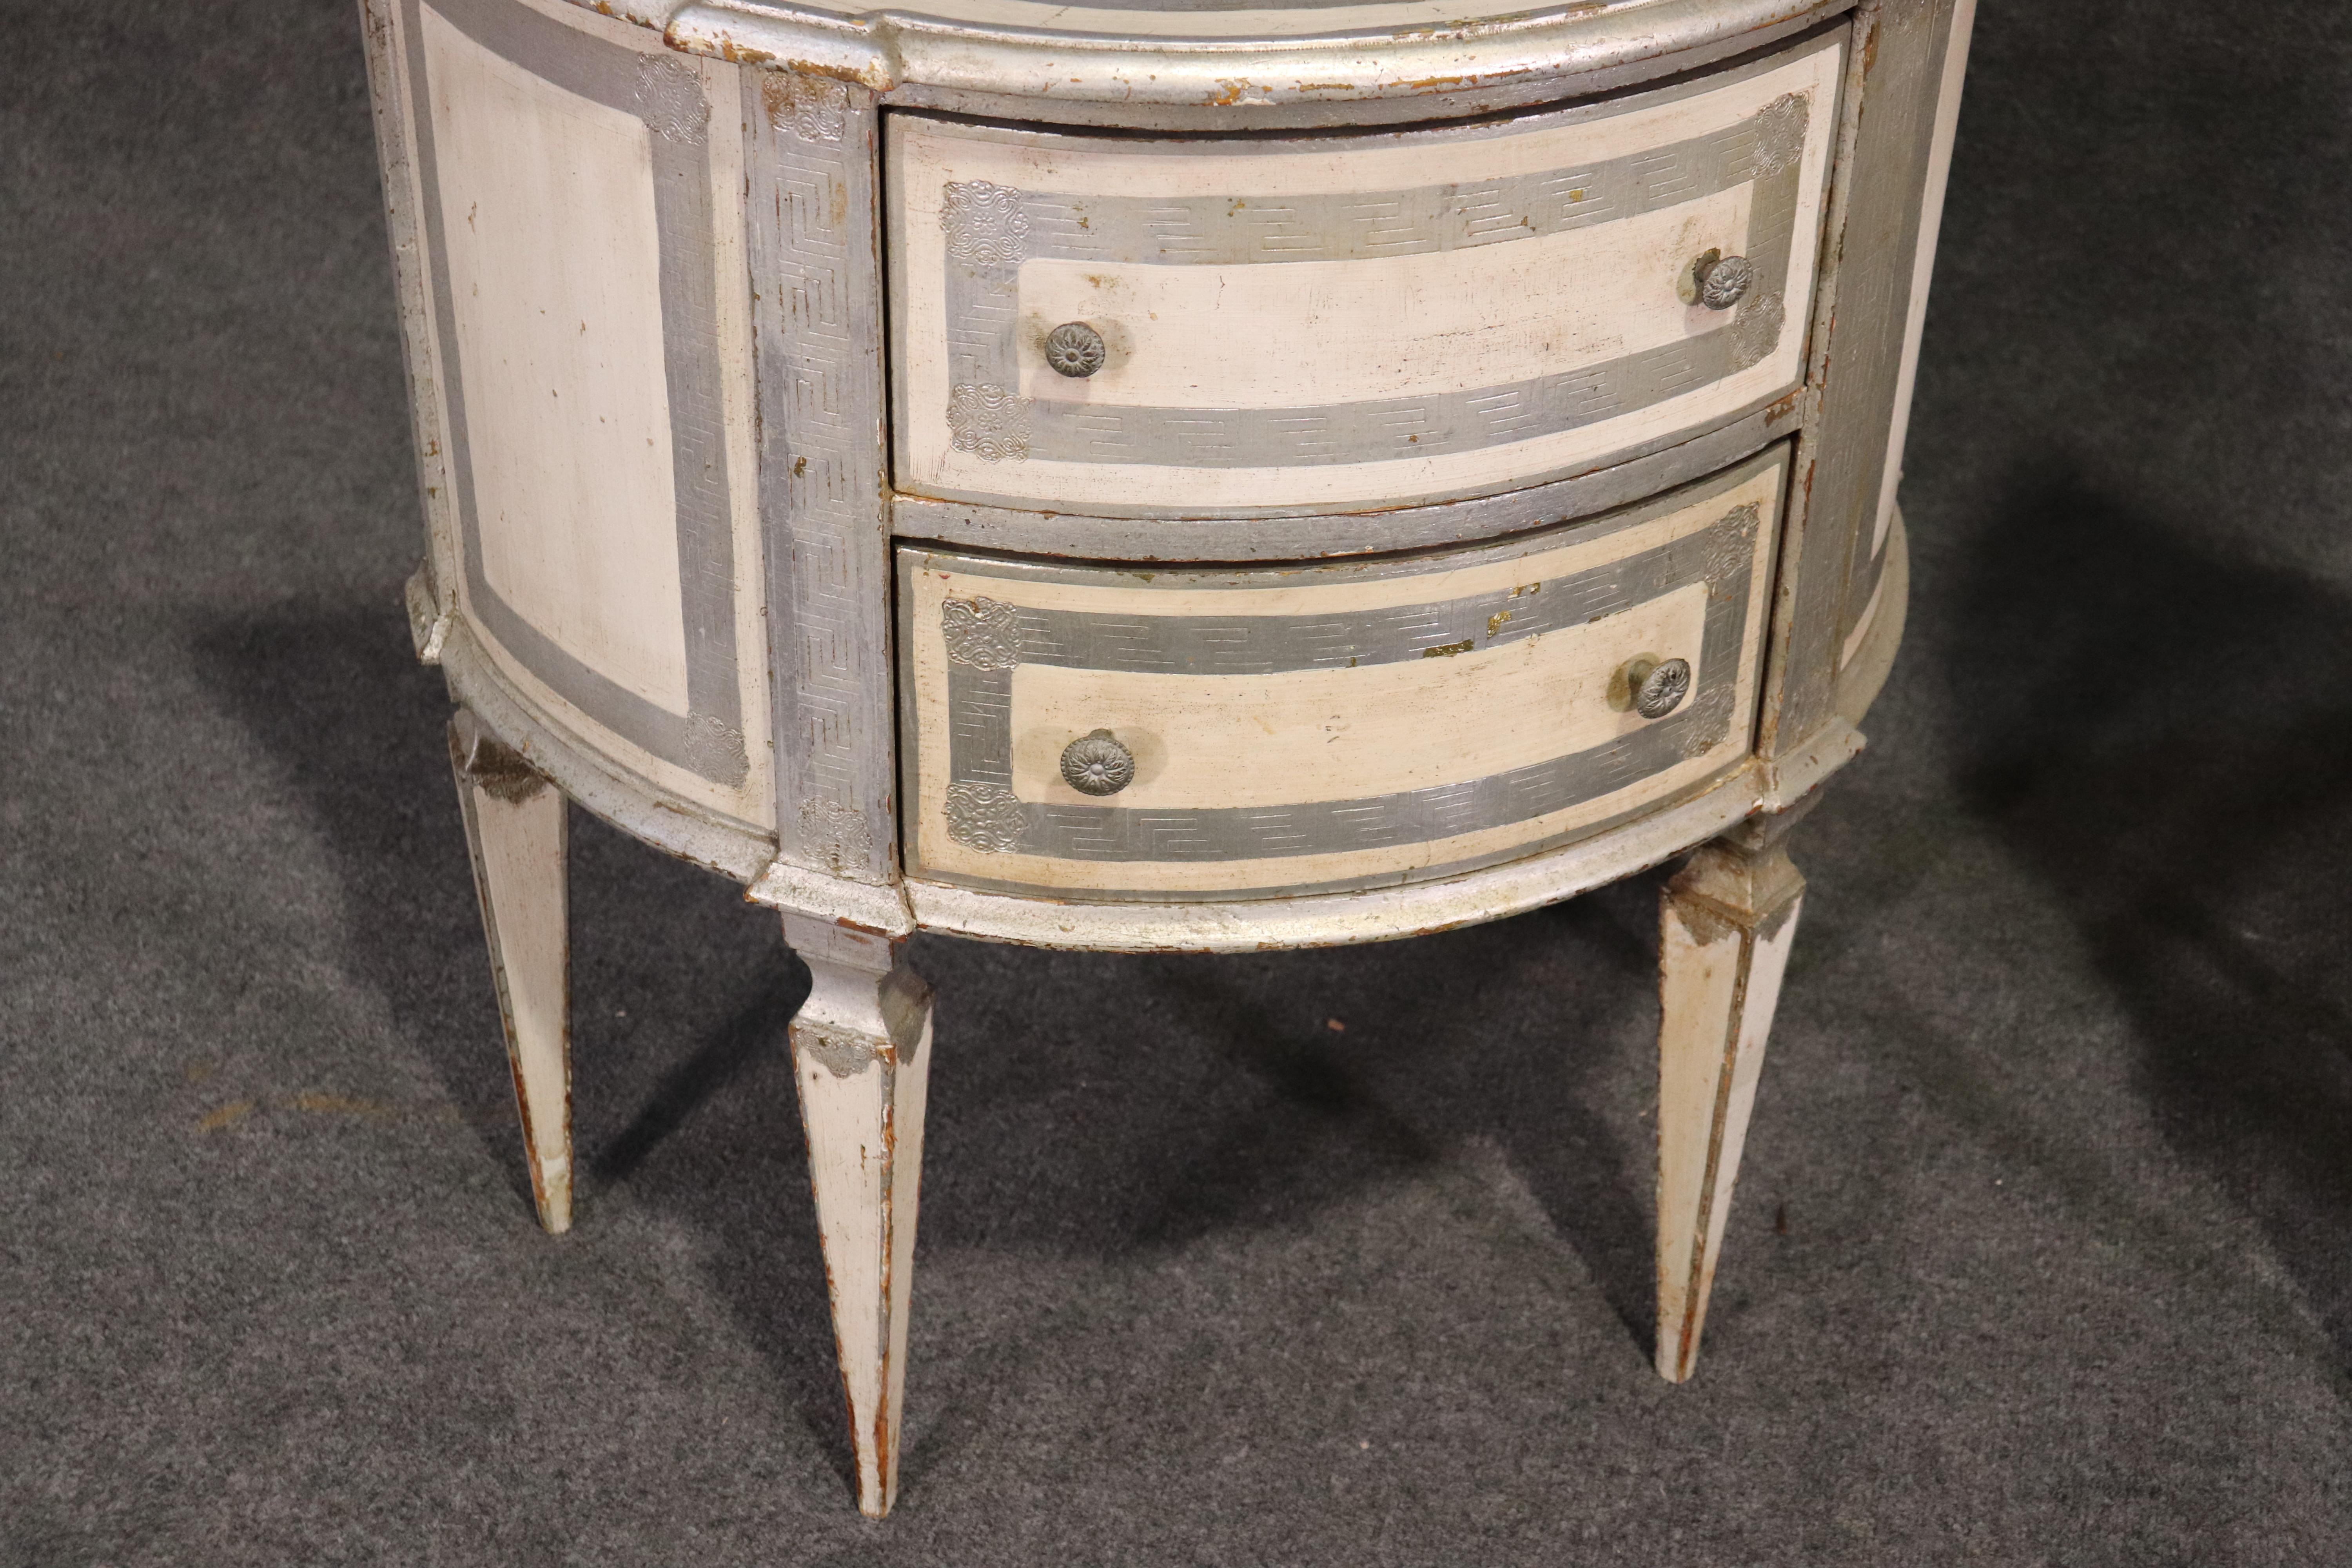 Italian Florentine Demilune Nightstands Commodes in Silver Leaf and White, Pair 1